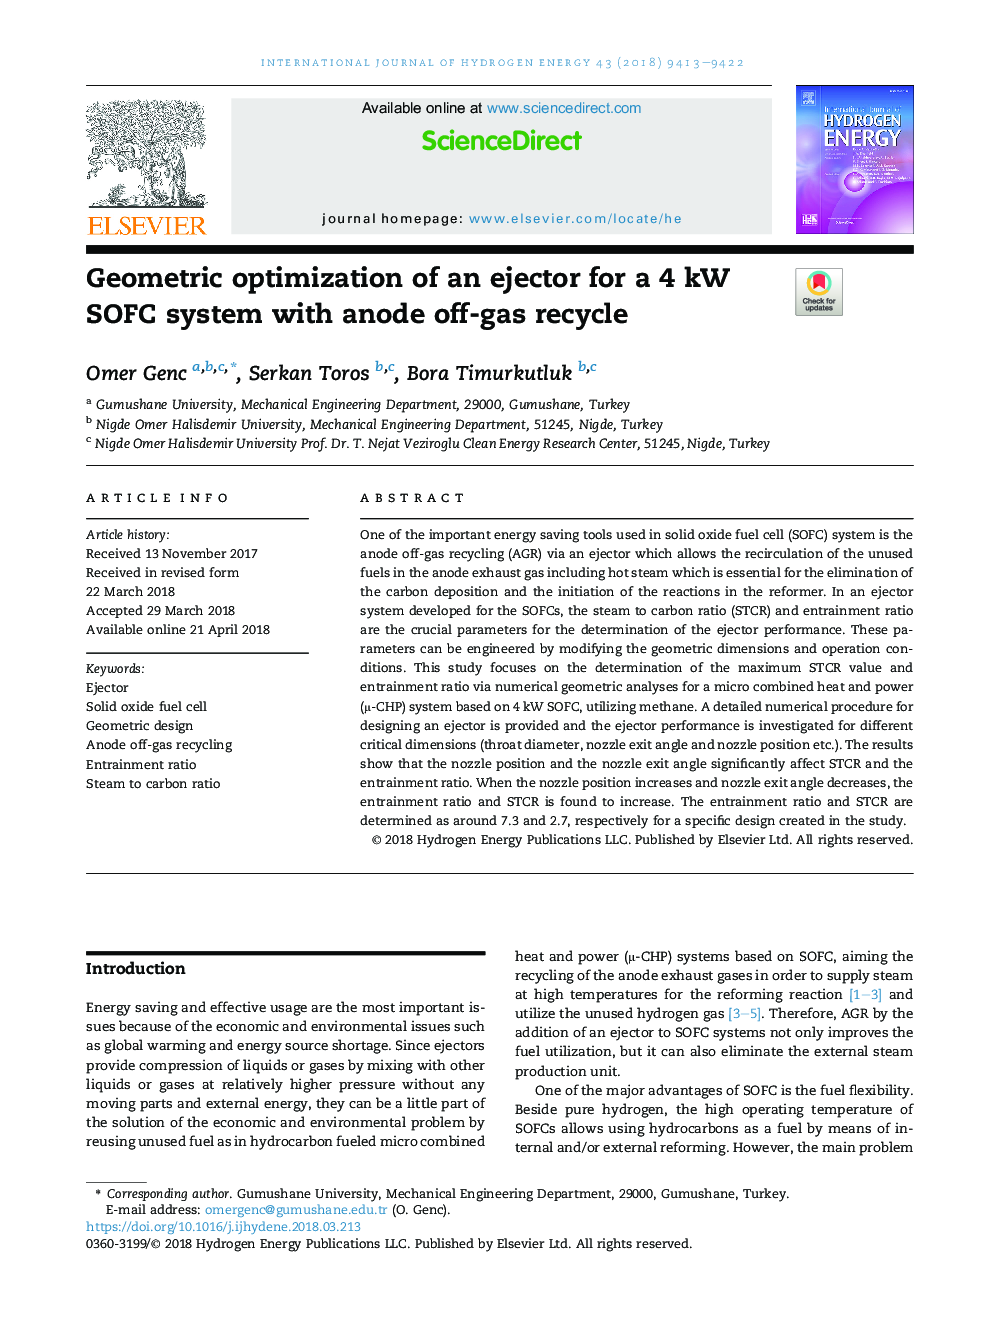 Geometric optimization of an ejector for a 4Â kW SOFC system with anode off-gas recycle